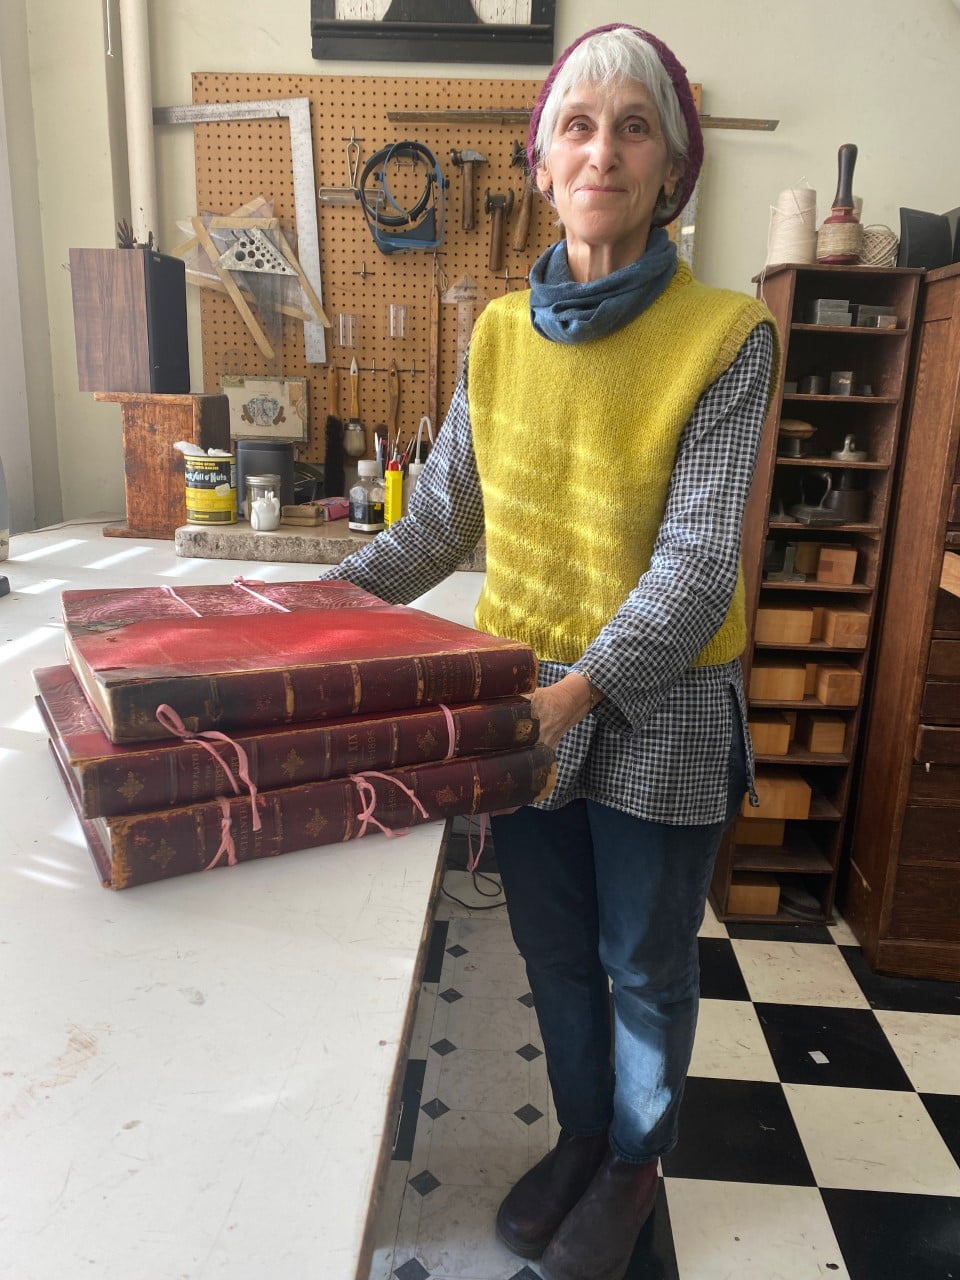 Judith Ivry with a stack of giant red bound books